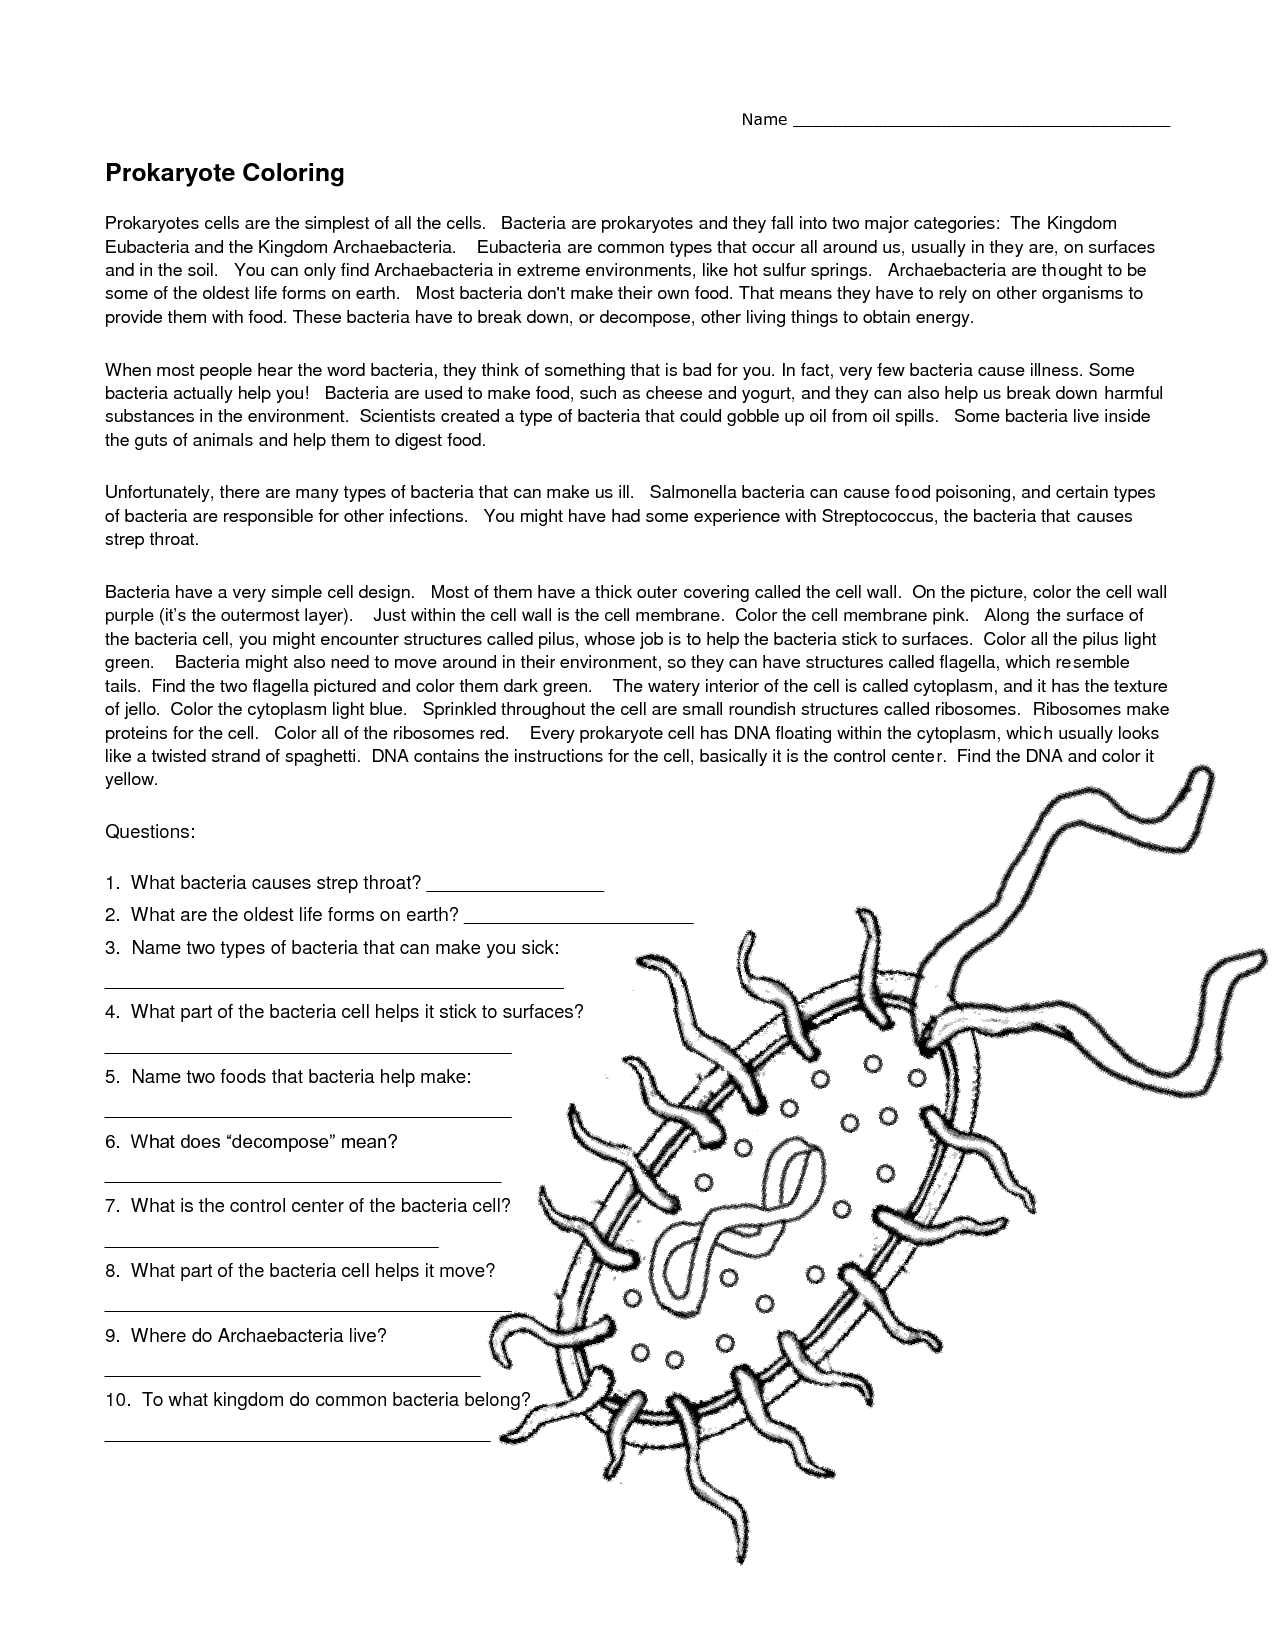 Virus and Bacteria Worksheet Answer Key Also Viruses Worksheet Answer Key Biology Binder